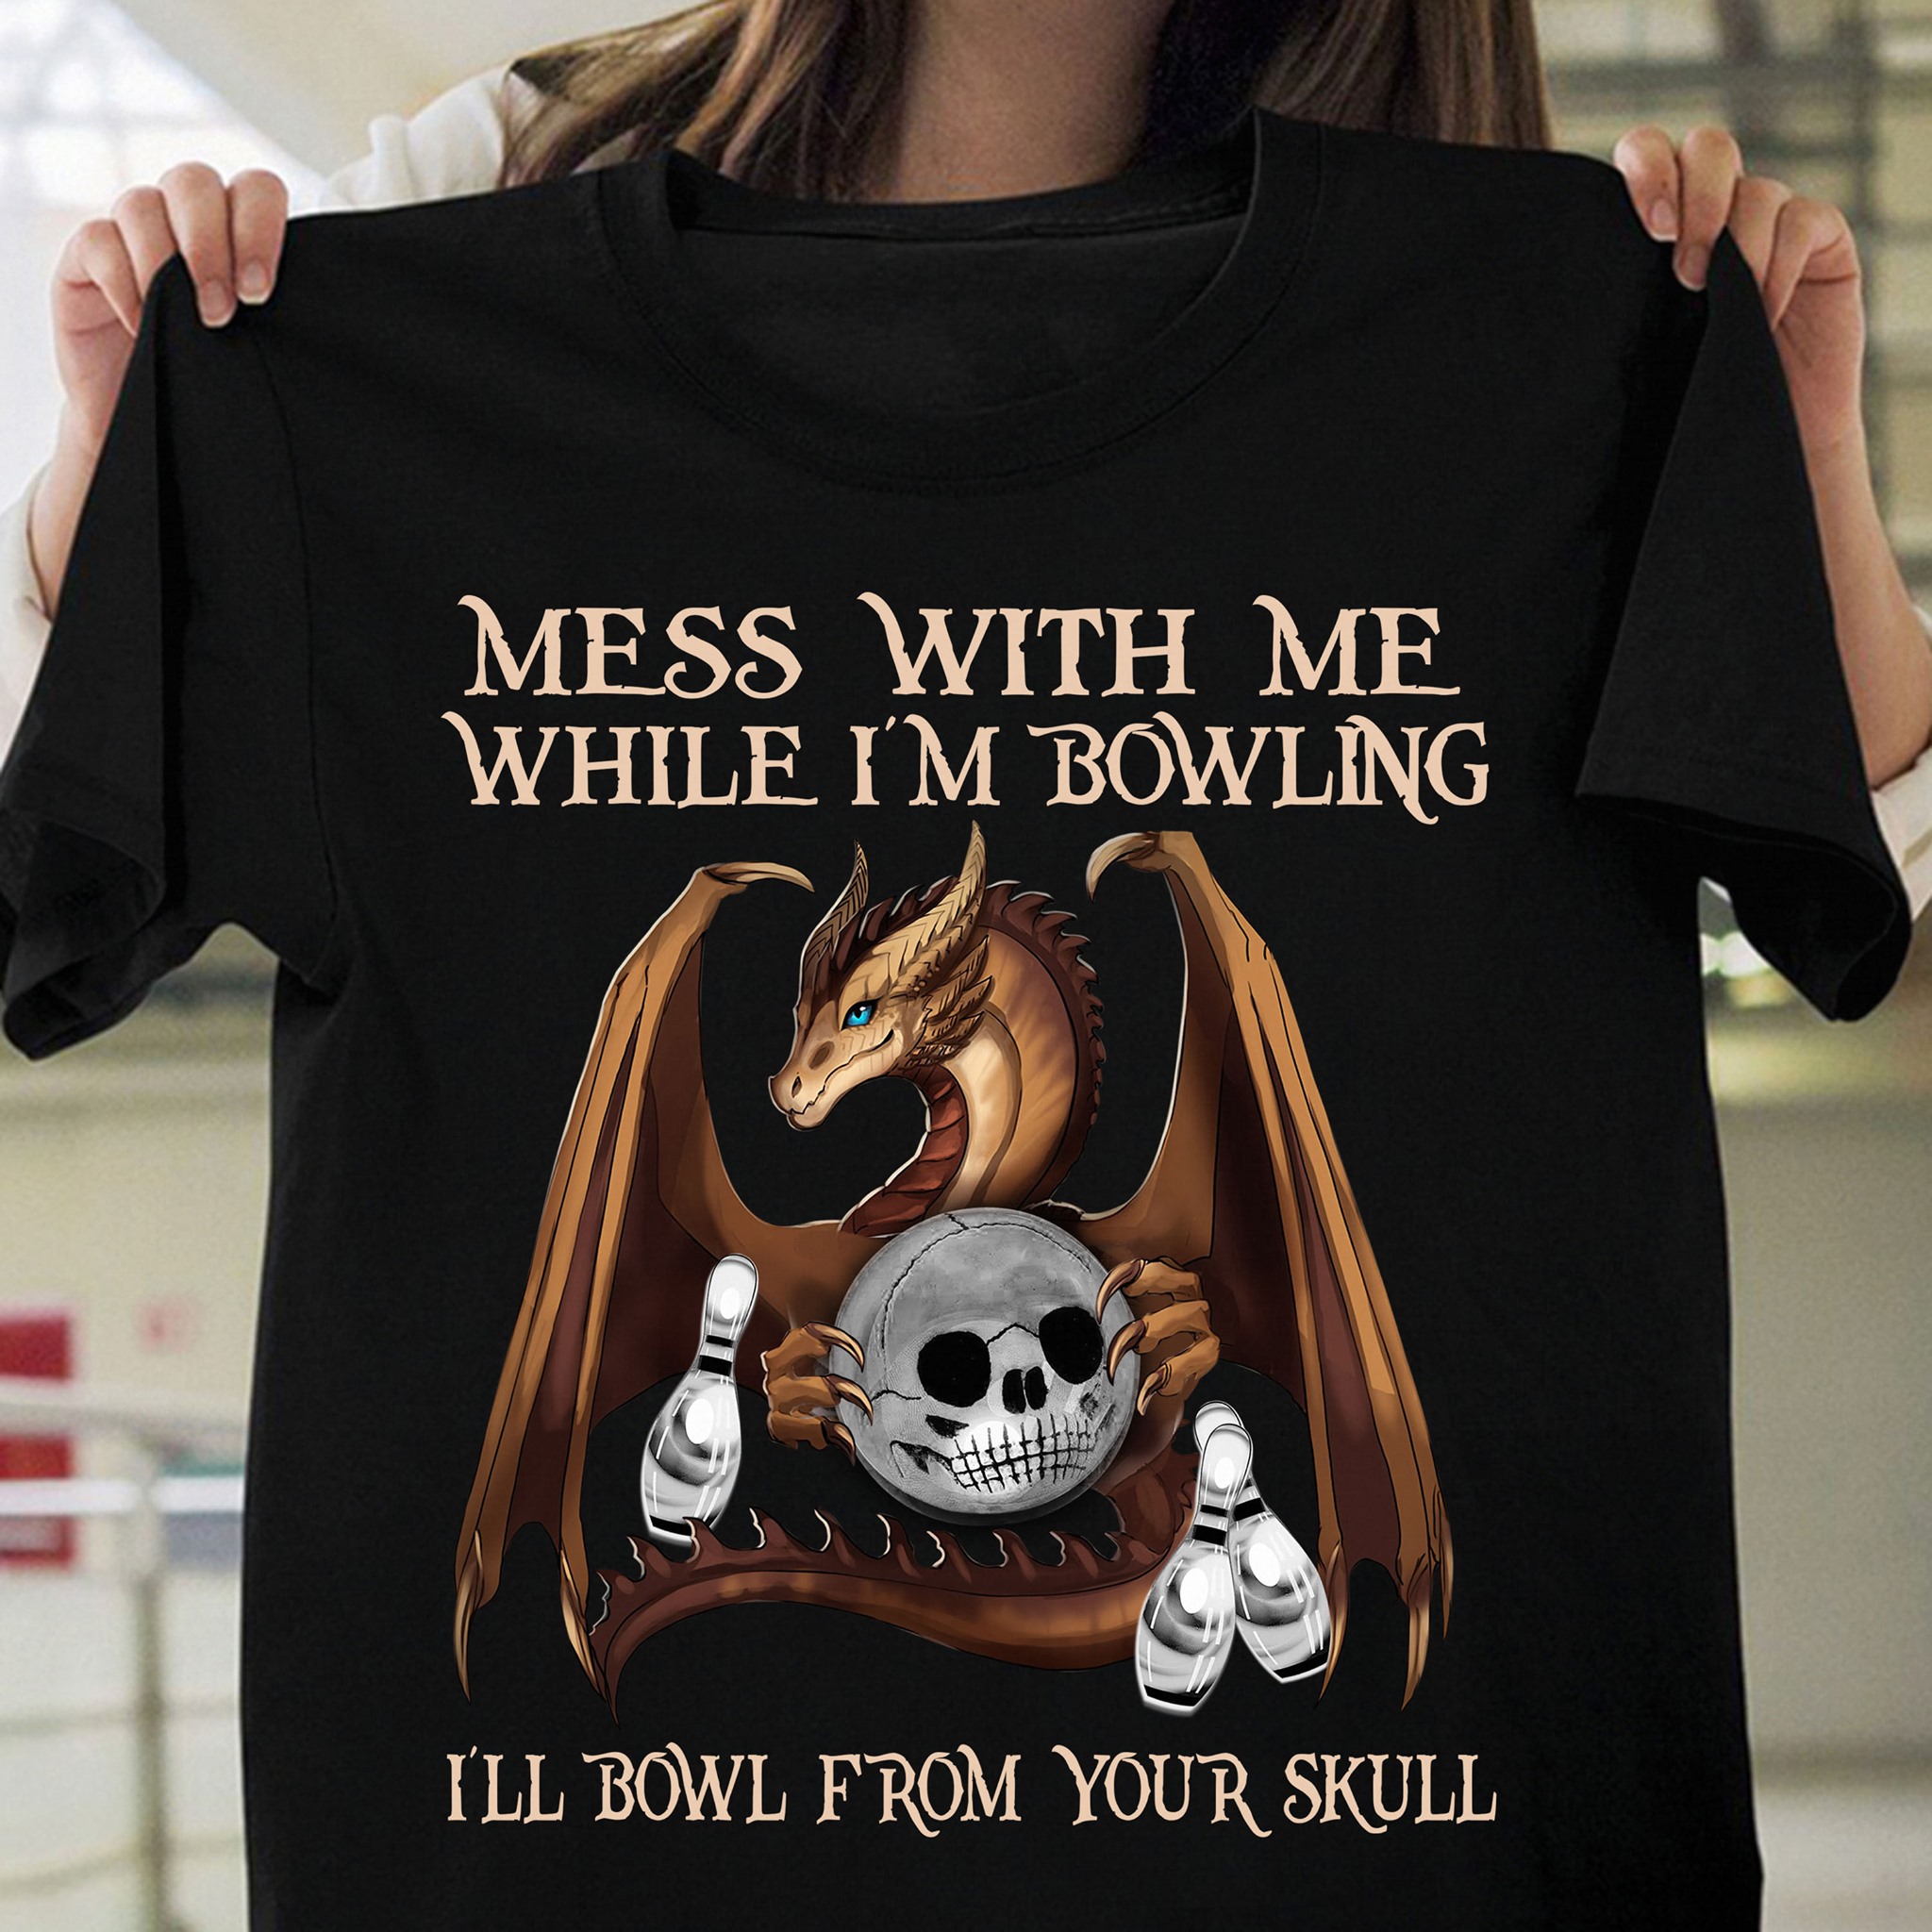 Mess with me while i'm bowling i'll bowl from your skull